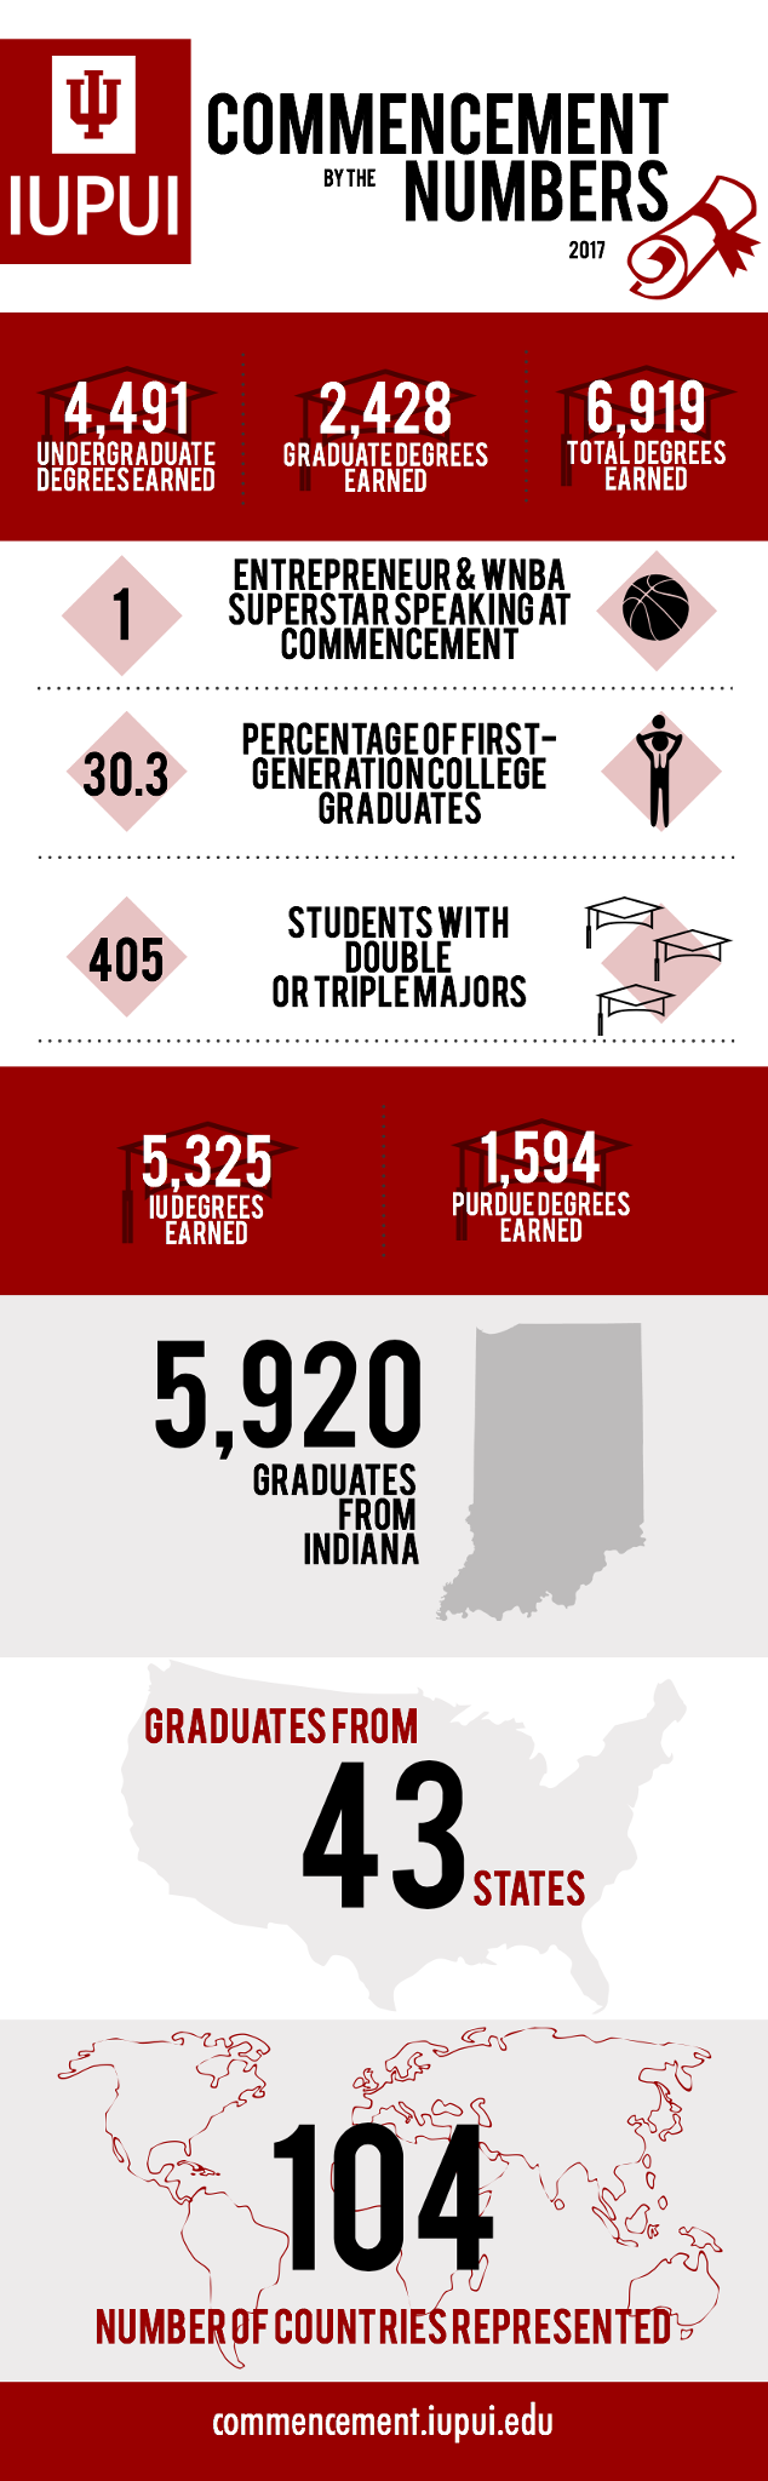 IUPUI commencement by the numbers infographic